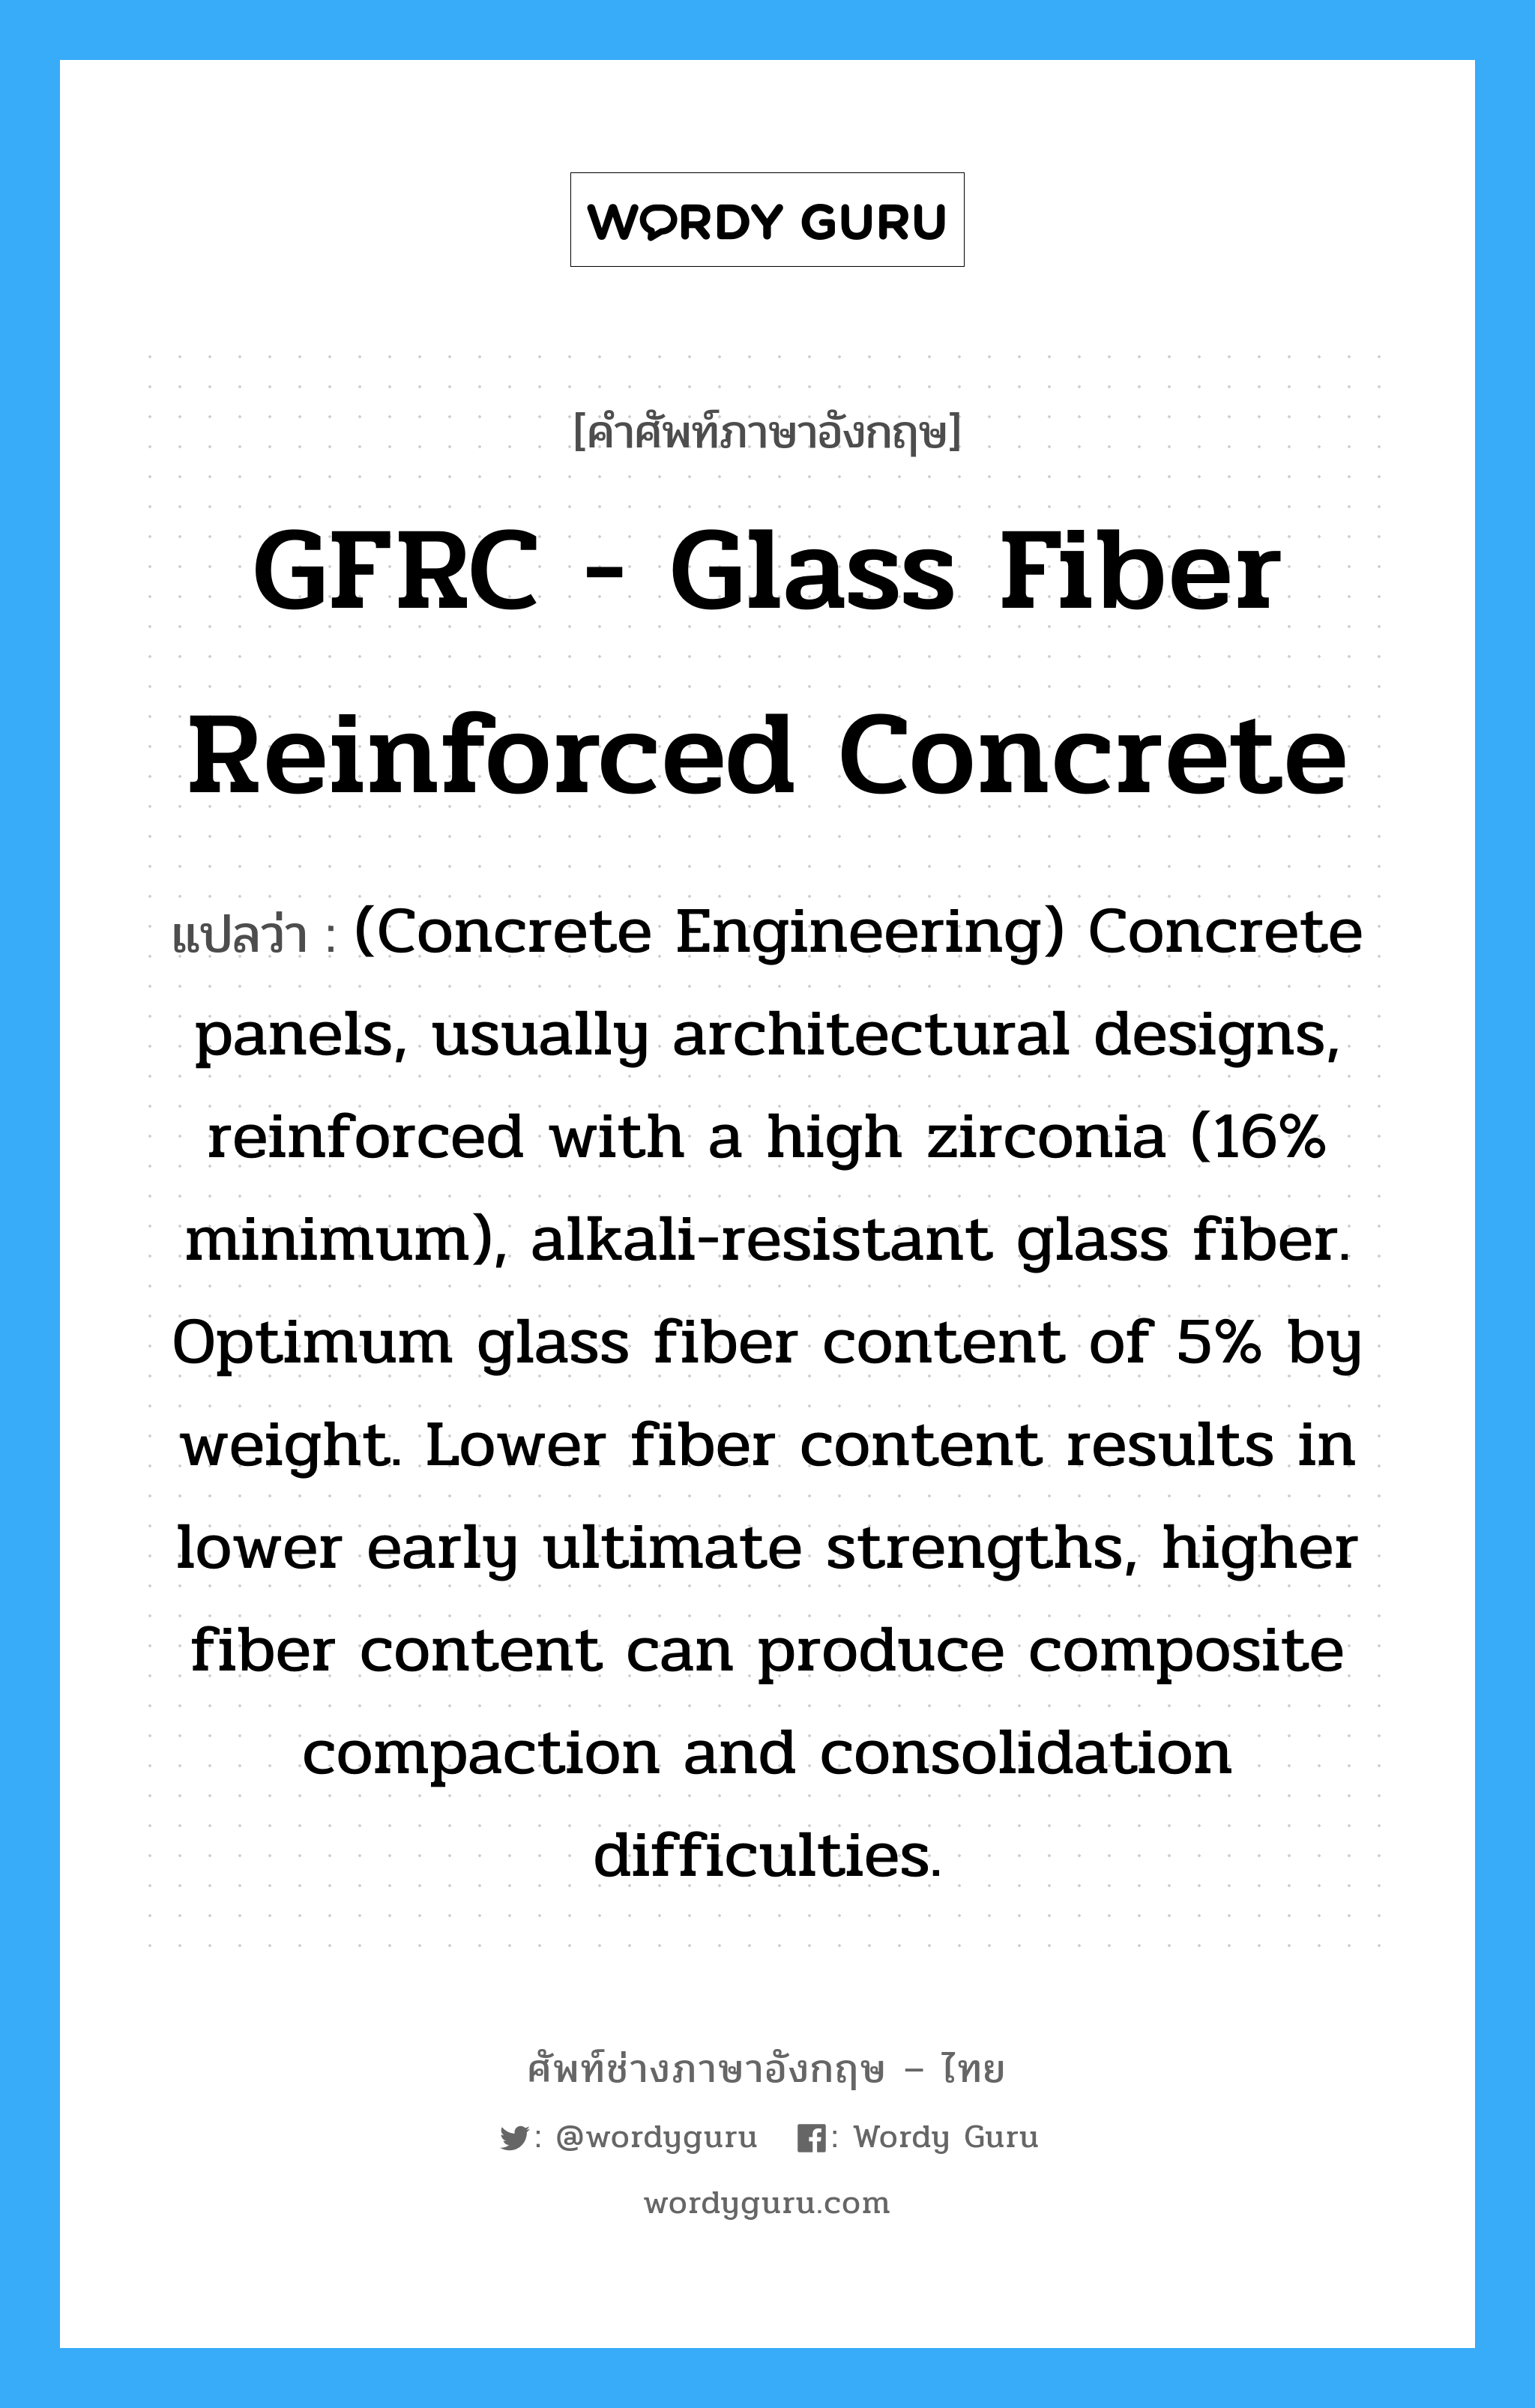 (Concrete Engineering) Concrete panels, usually architectural designs, reinforced with a high zirconia (16% minimum), alkali-resistant glass fiber. Optimum glass fiber content of 5% by weight. Lower fiber content results in lower early ultimate strengths, higher fiber content can produce composite compaction and consolidation difficulties. ภาษาอังกฤษ?, คำศัพท์ช่างภาษาอังกฤษ - ไทย (Concrete Engineering) Concrete panels, usually architectural designs, reinforced with a high zirconia (16% minimum), alkali-resistant glass fiber. Optimum glass fiber content of 5% by weight. Lower fiber content results in lower early ultimate strengths, higher fiber content can produce composite compaction and consolidation difficulties. คำศัพท์ภาษาอังกฤษ (Concrete Engineering) Concrete panels, usually architectural designs, reinforced with a high zirconia (16% minimum), alkali-resistant glass fiber. Optimum glass fiber content of 5% by weight. Lower fiber content results in lower early ultimate strengths, higher fiber content can produce composite compaction and consolidation difficulties. แปลว่า GFRC - Glass Fiber Reinforced Concrete